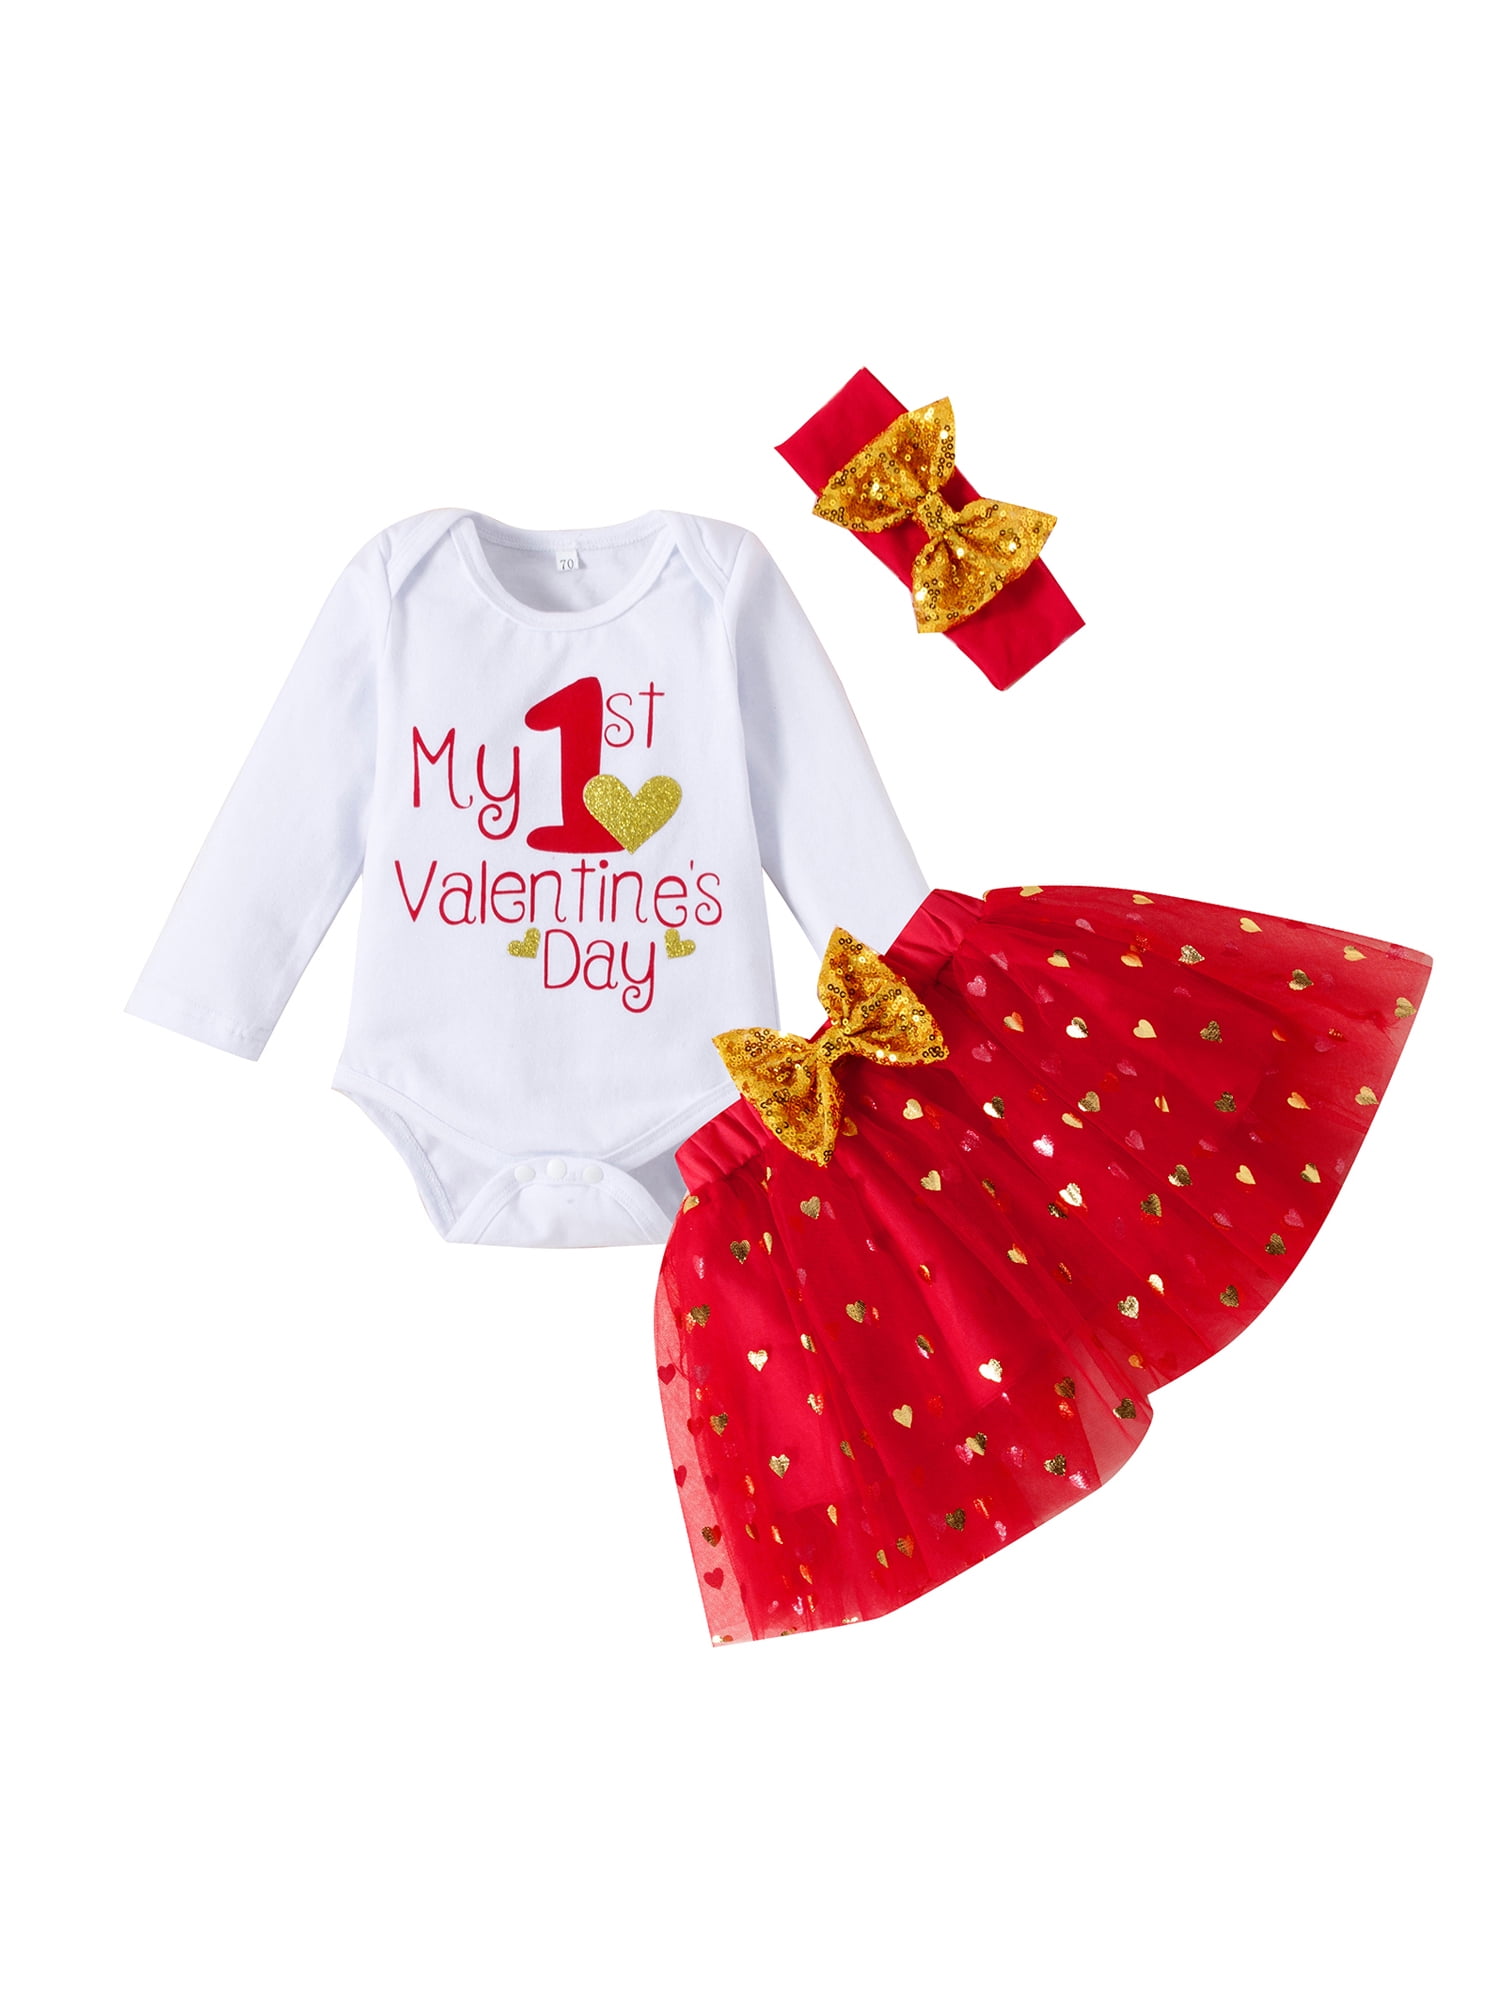 Newborn Infant Baby Girls Valentine's Day Outfit Long Sleeve Romper Tutu Skirt 4PCS Clothes Set 